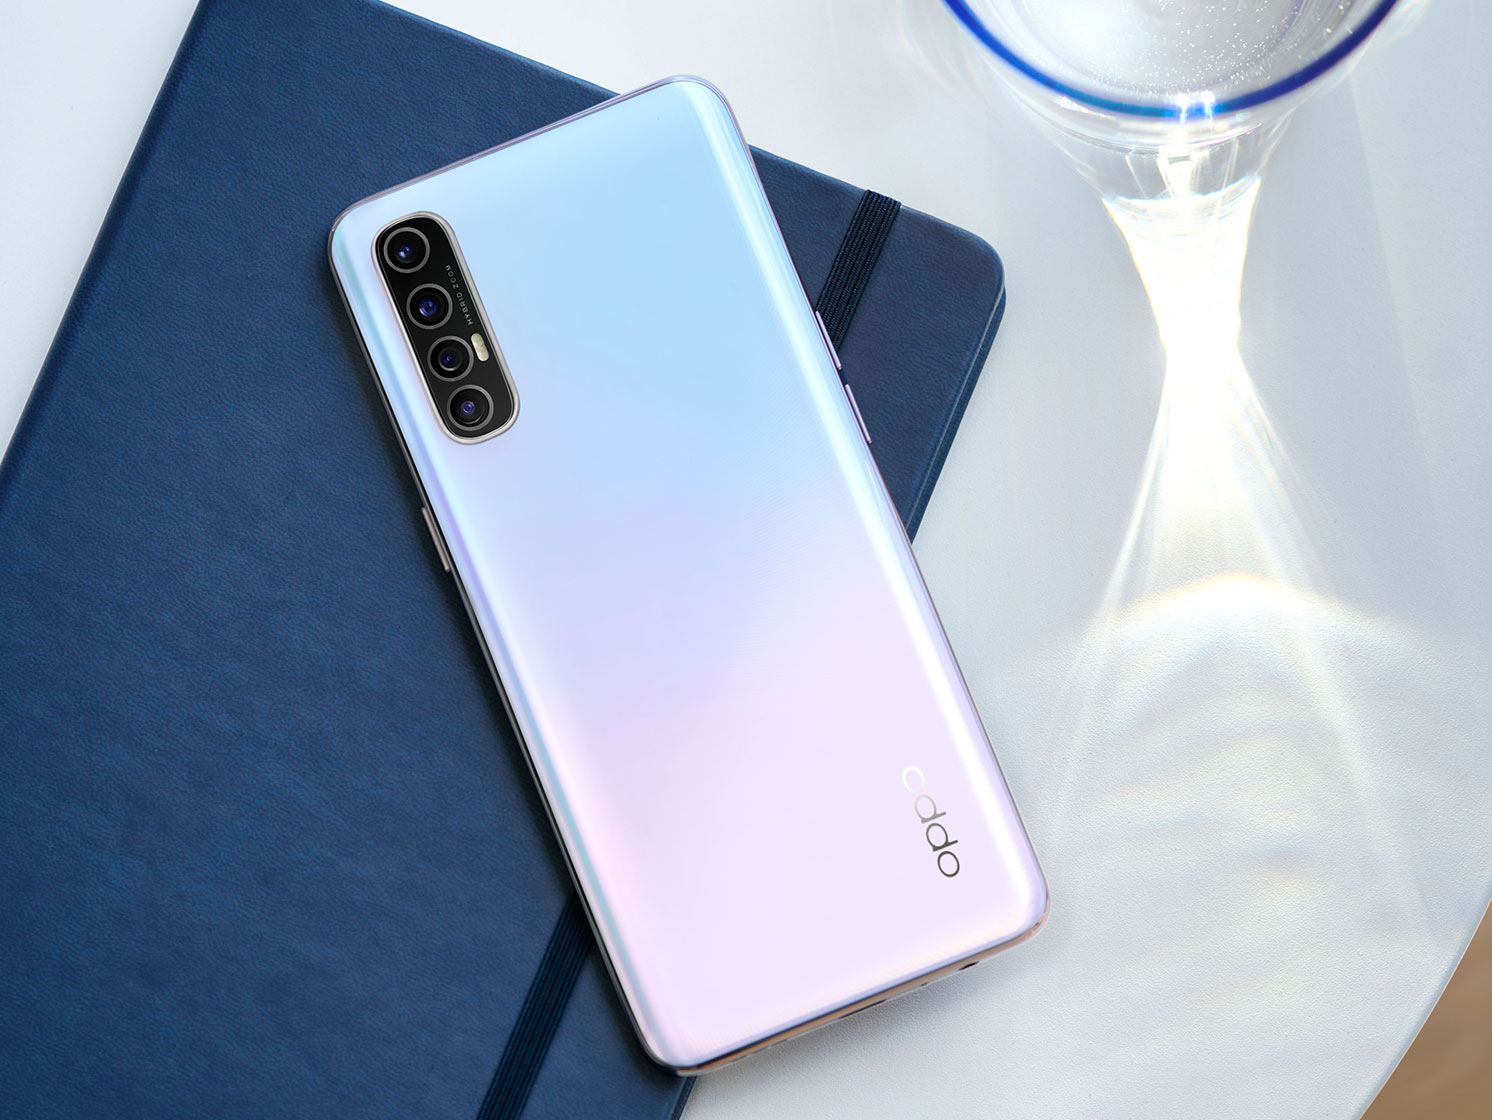 OPPO 5G smartphones to be sold from KDDI and SoftBank in the Japanese market